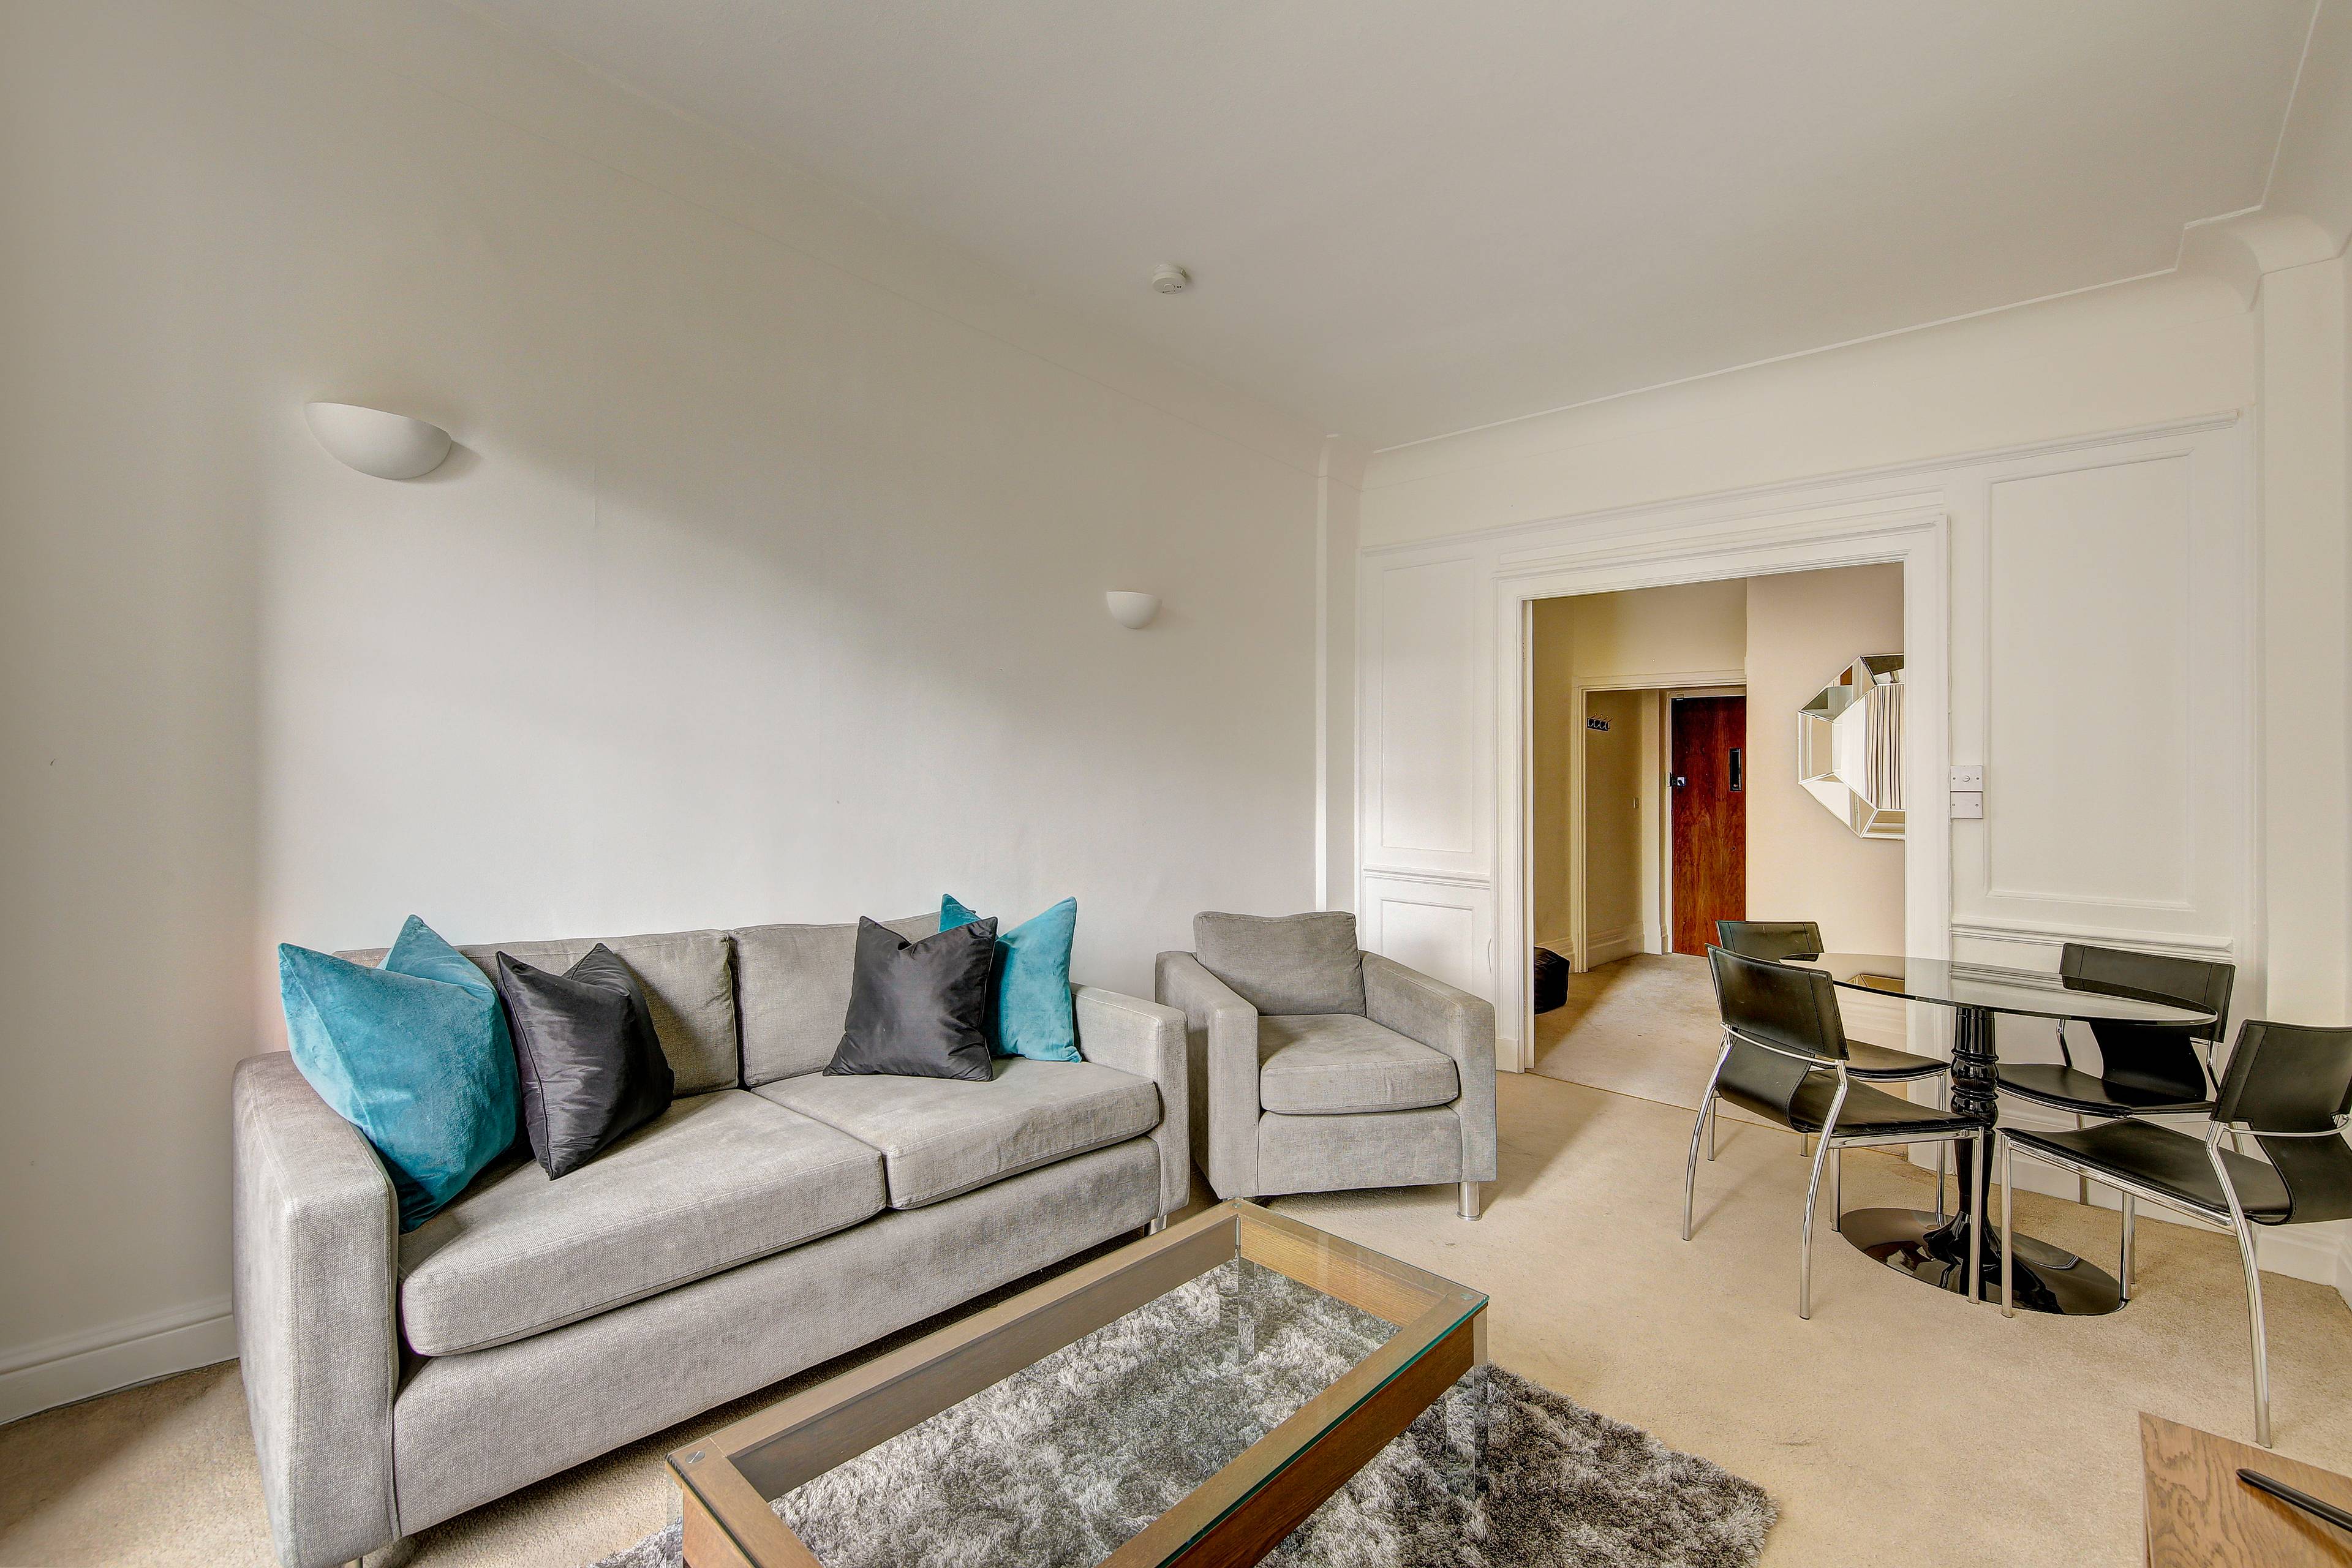 Stunning 1 bed apartment to rent in St Johns Wood, Strathmore court